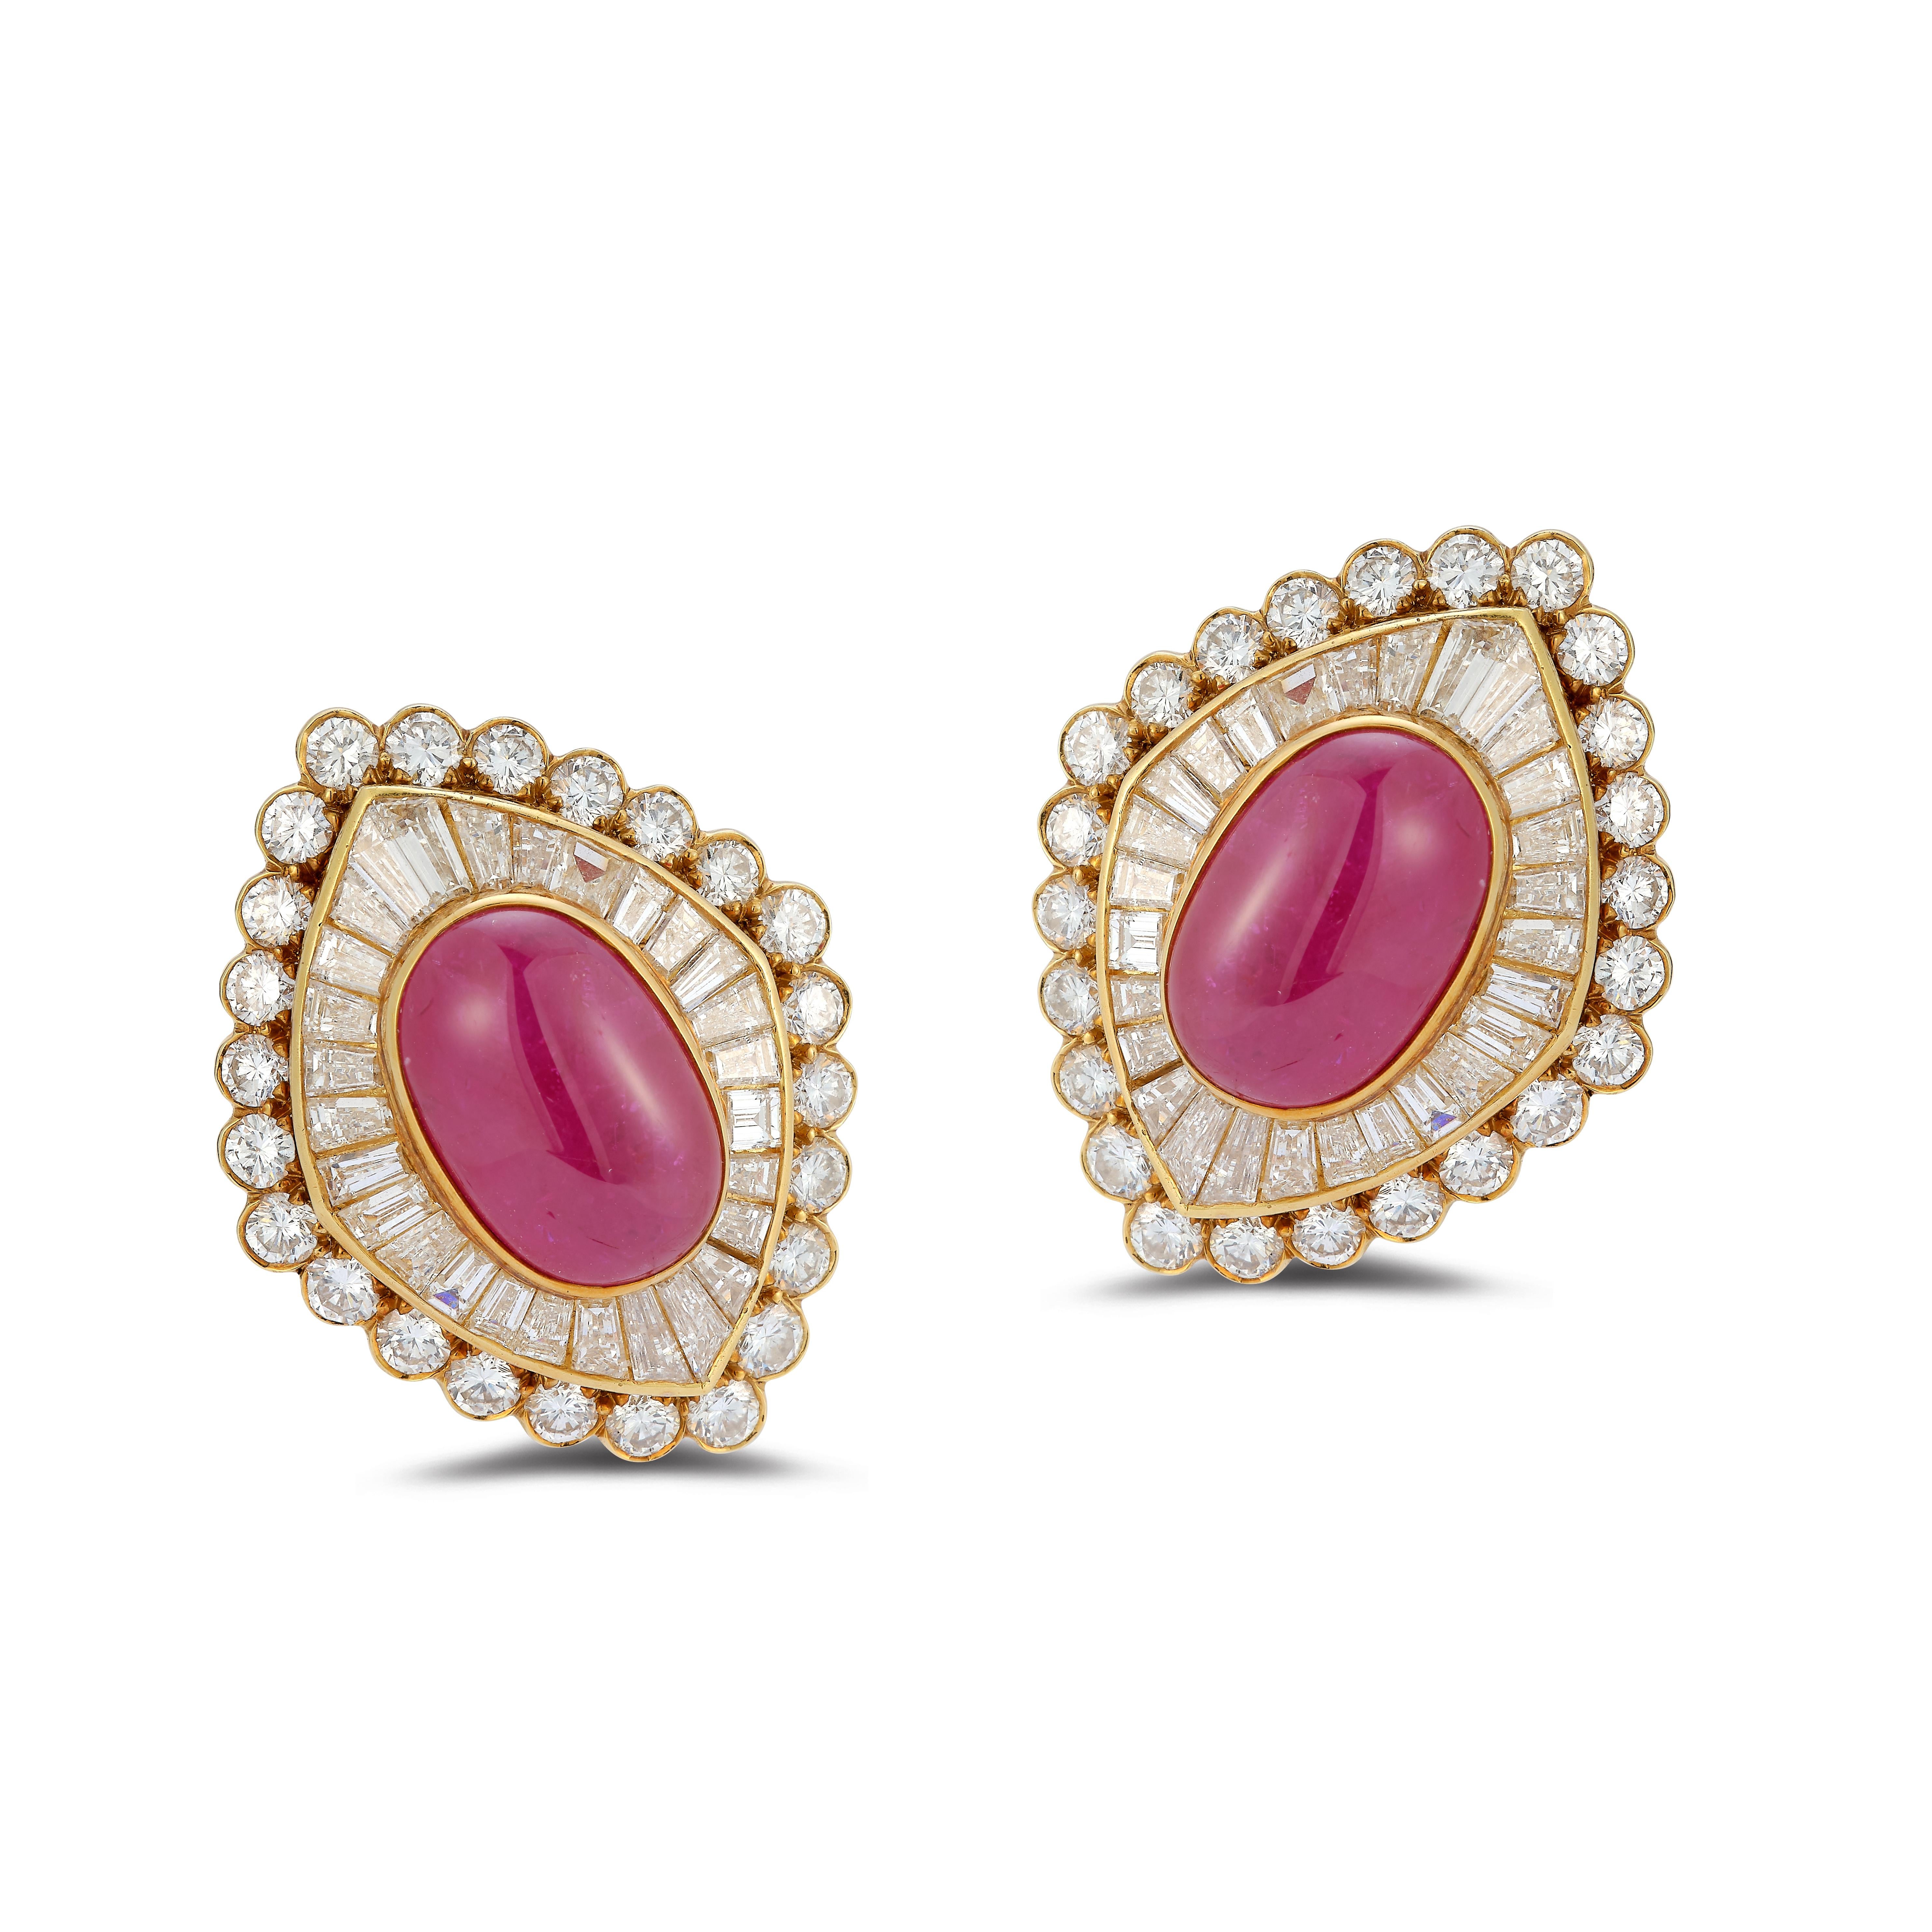 Van Cleef Cabochon Ruby & Diamond Clip On Earrings, A central cabochon ruby, framed by baguette and round diamonds.

Rubies measuring approximately 15.2 x 10.1 x 6.6 and 15.3 x 10.2 x 6.7 mm

Diamonds weighing a total of approximately 8.40